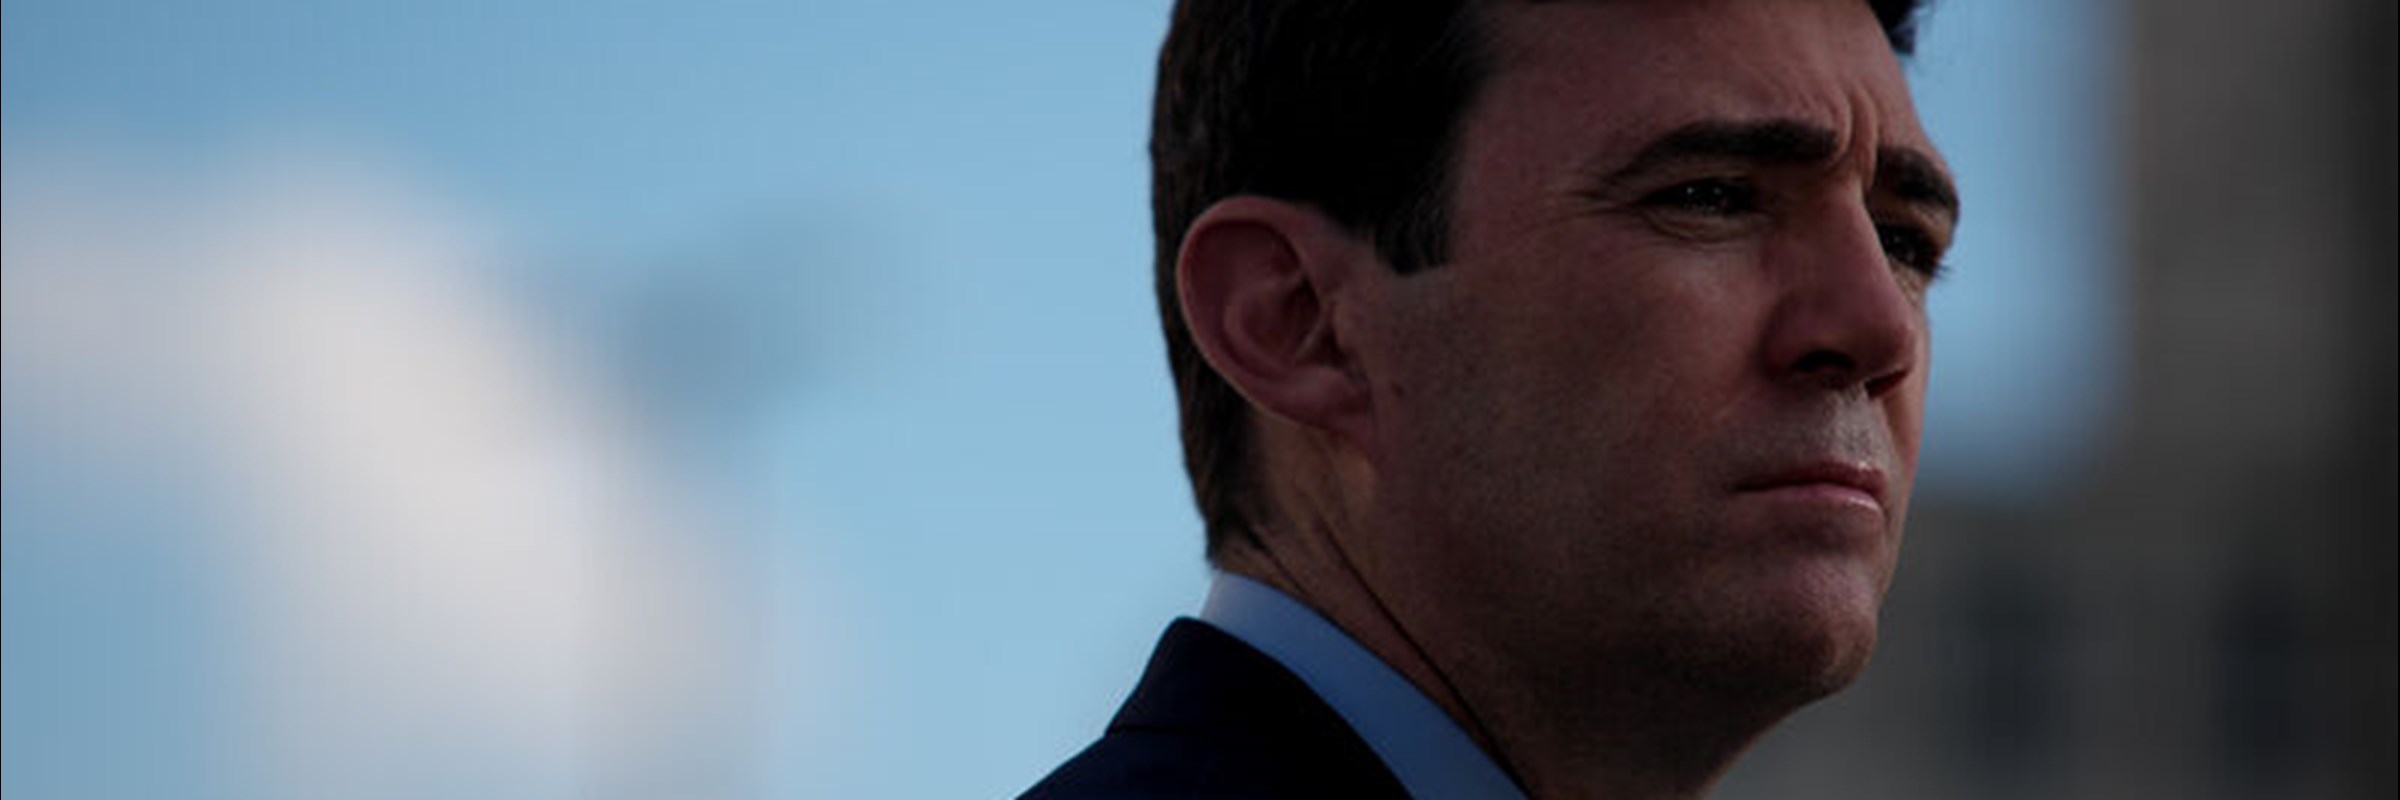 Mayor of Greater Manchester, Andy Burnham